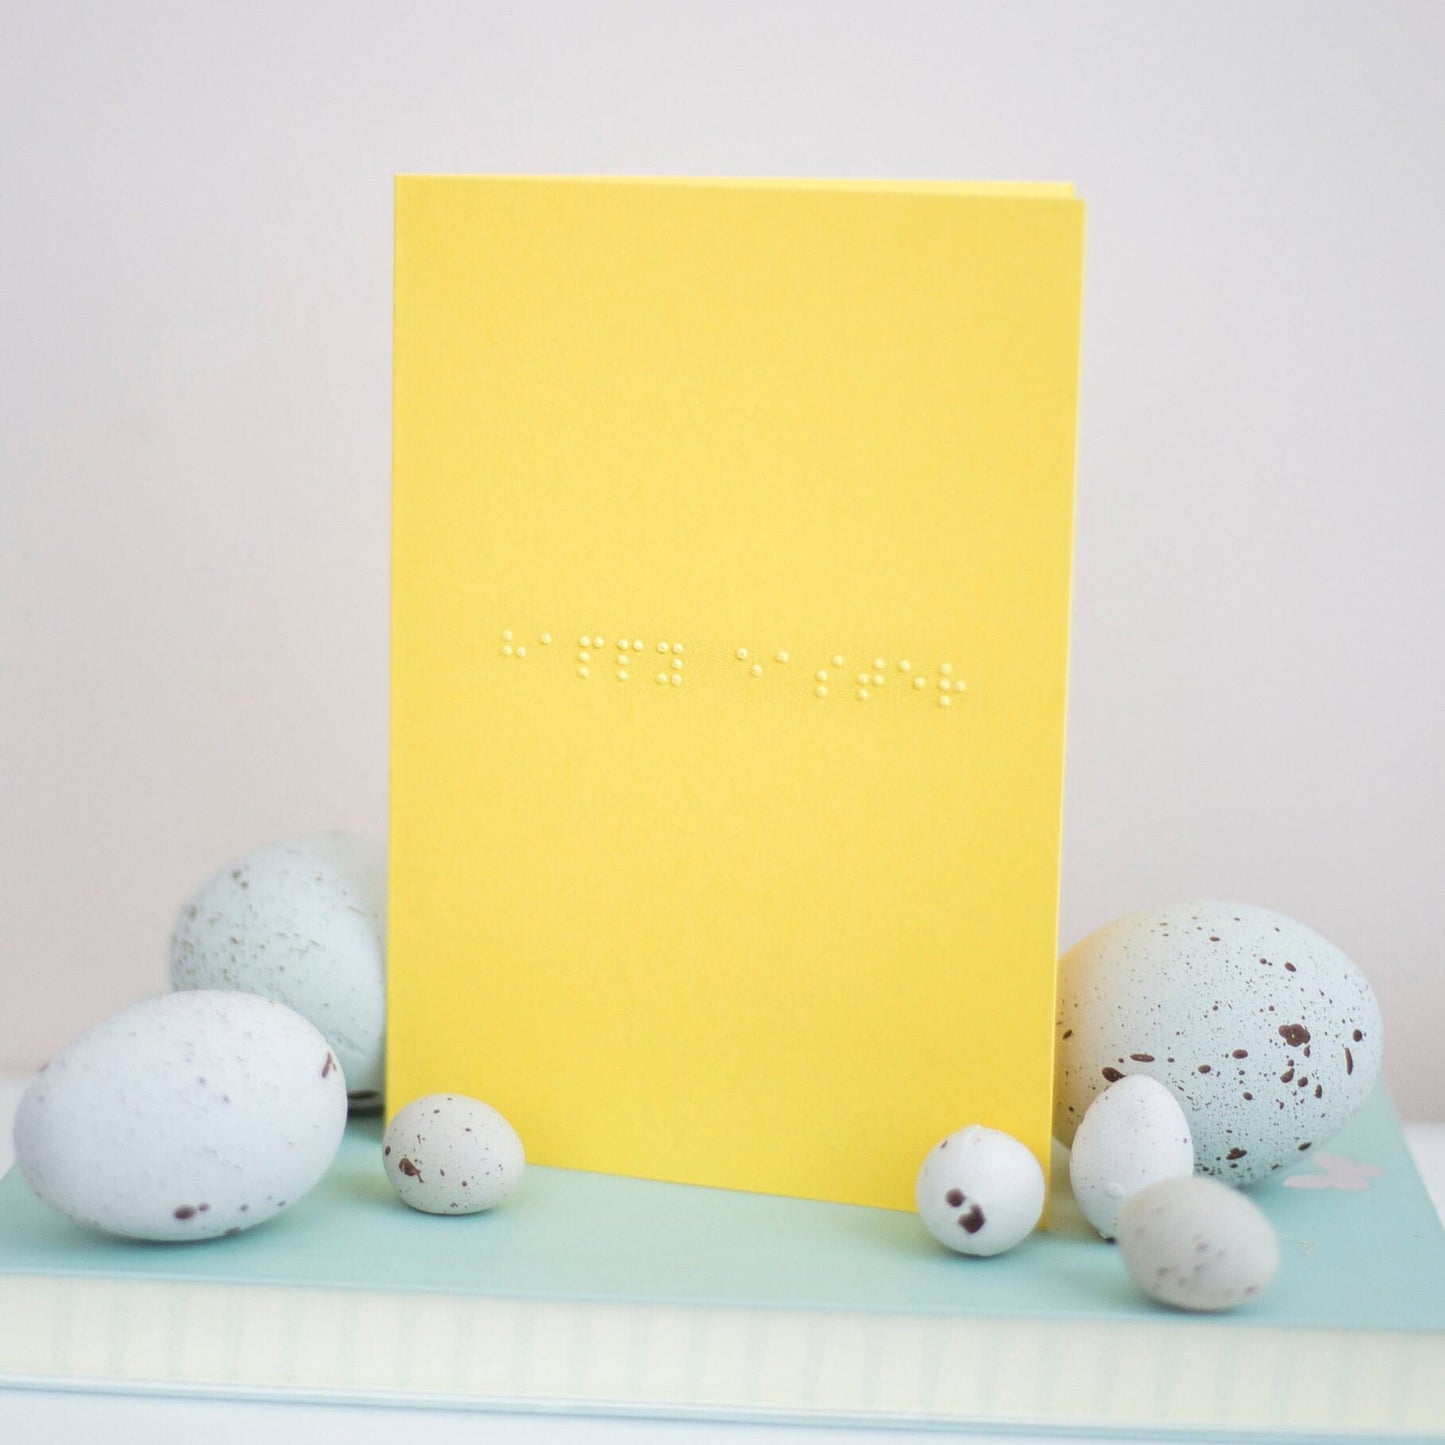 A vibrant yellow card with happy easter written in lower case braille. There are small eggs around the edges.